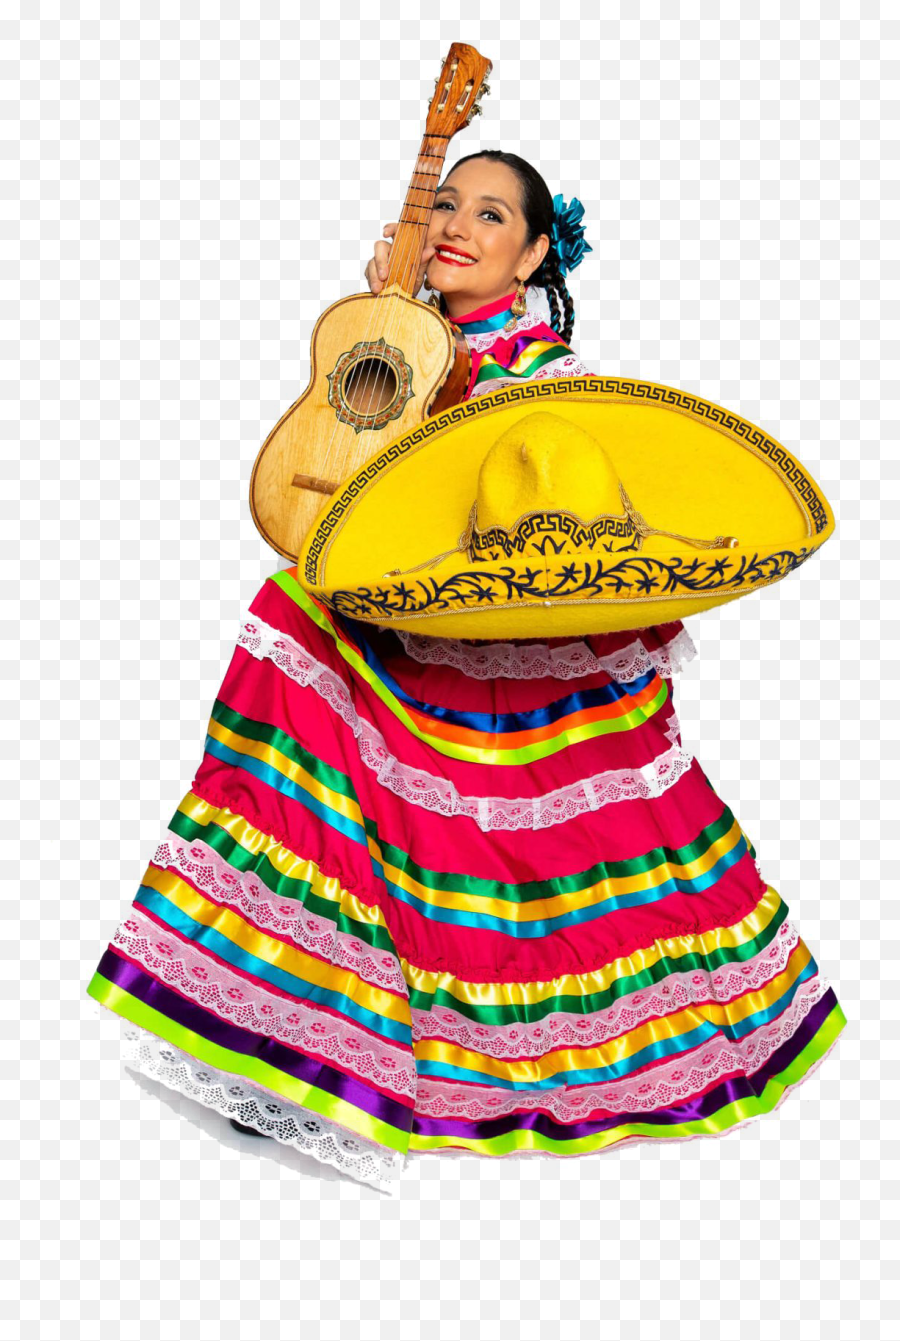 Veronica Robles - A Female Mariachi Mexican Singer And Emoji,Mariachi Png